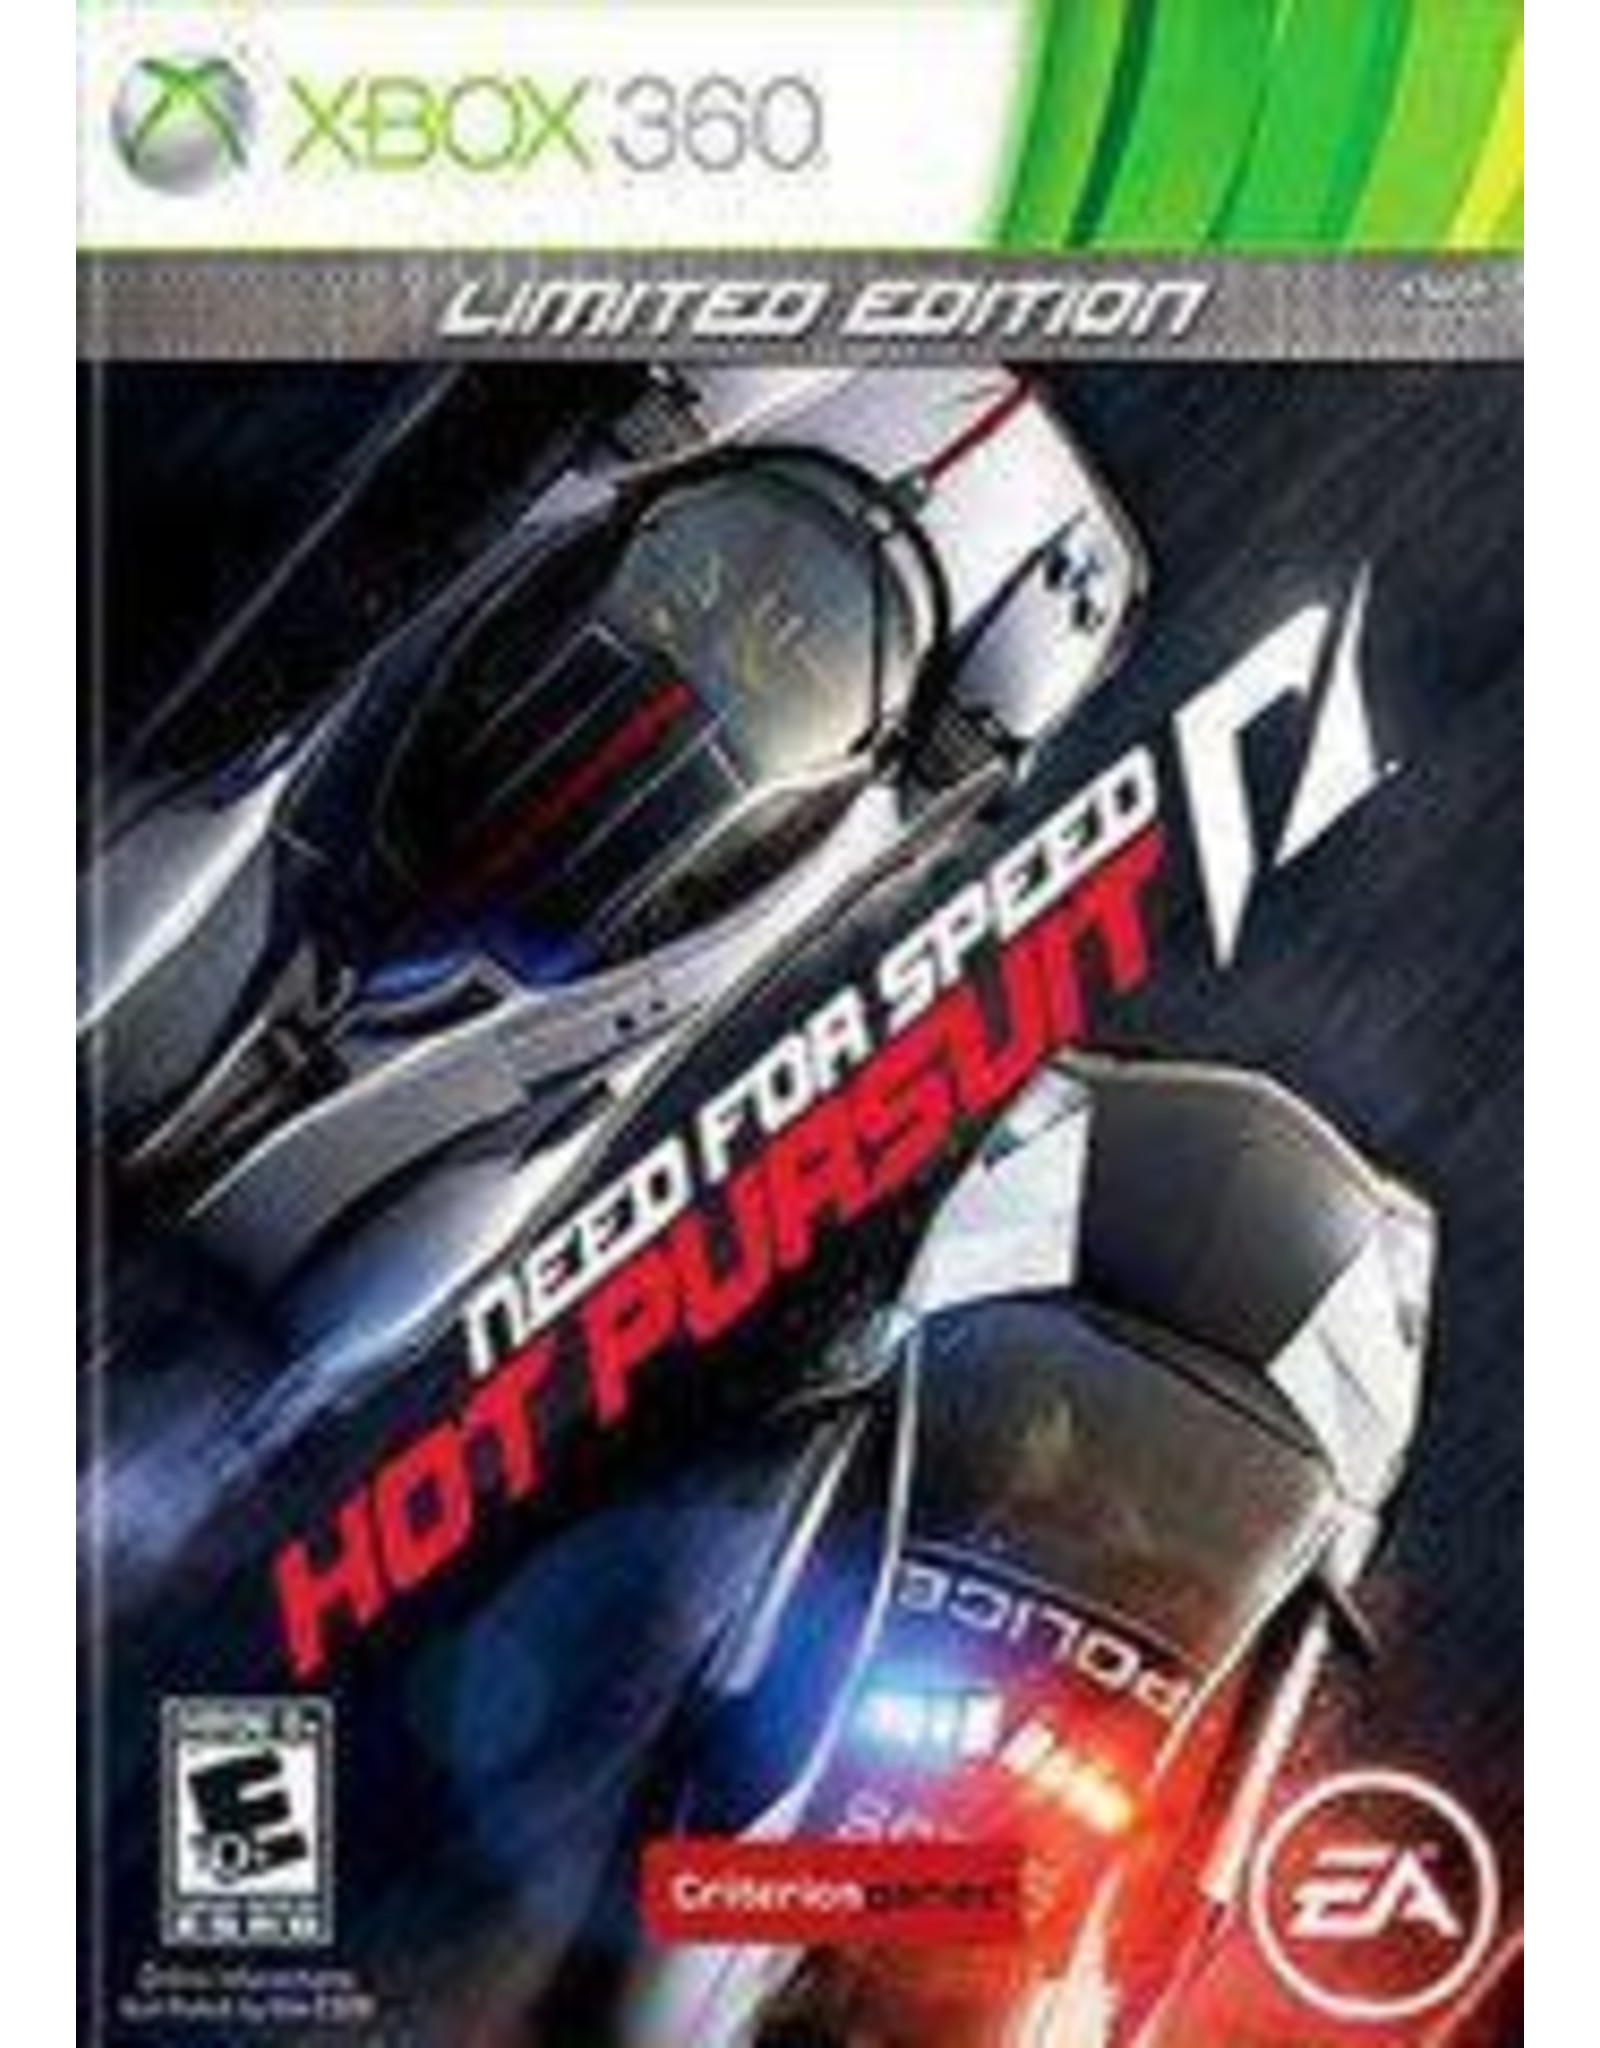 Xbox 360 Need For Speed: Hot Pursuit Limited Edition (CiB, No DLC)